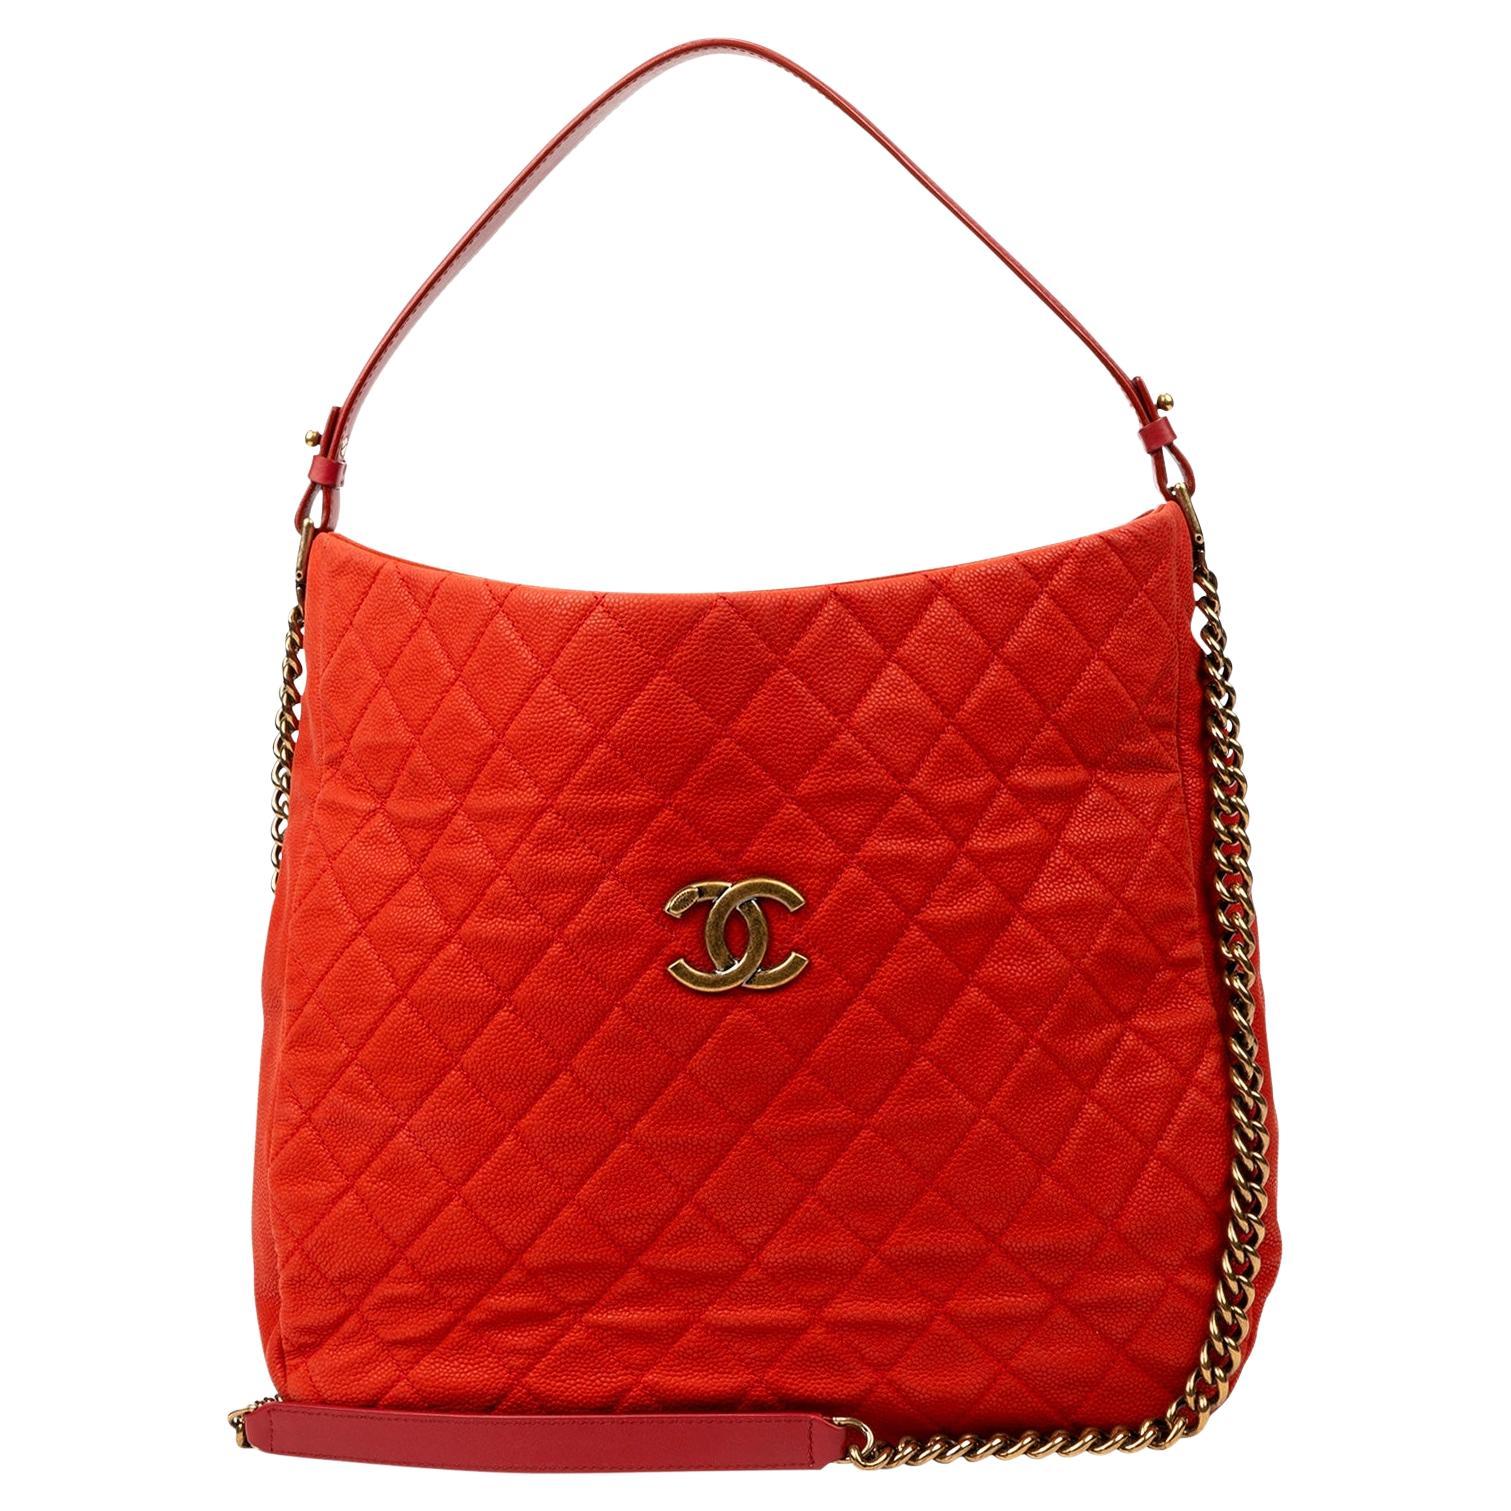 Chanel 2013 Cruise Collection Red Caviar Shopper